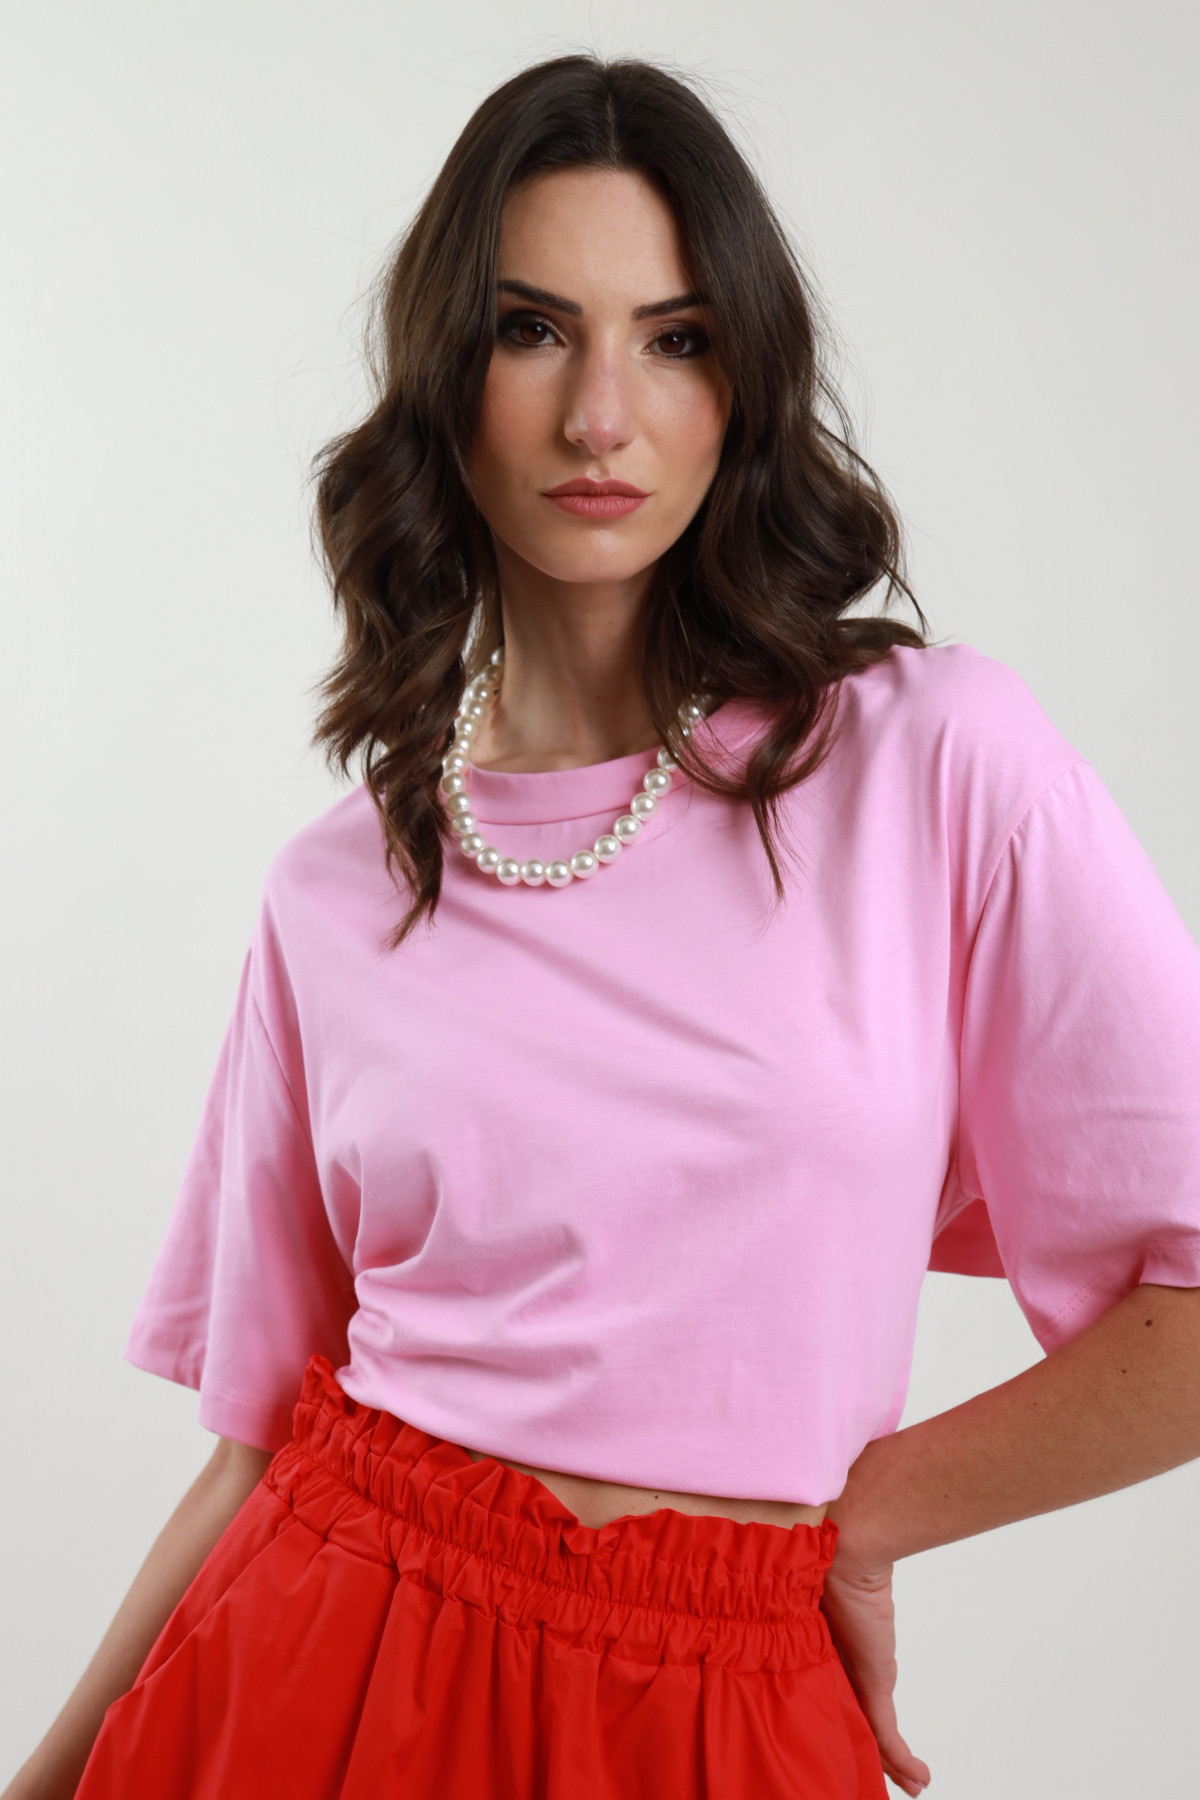 Oversized T-Shirt With Pearl Necklace